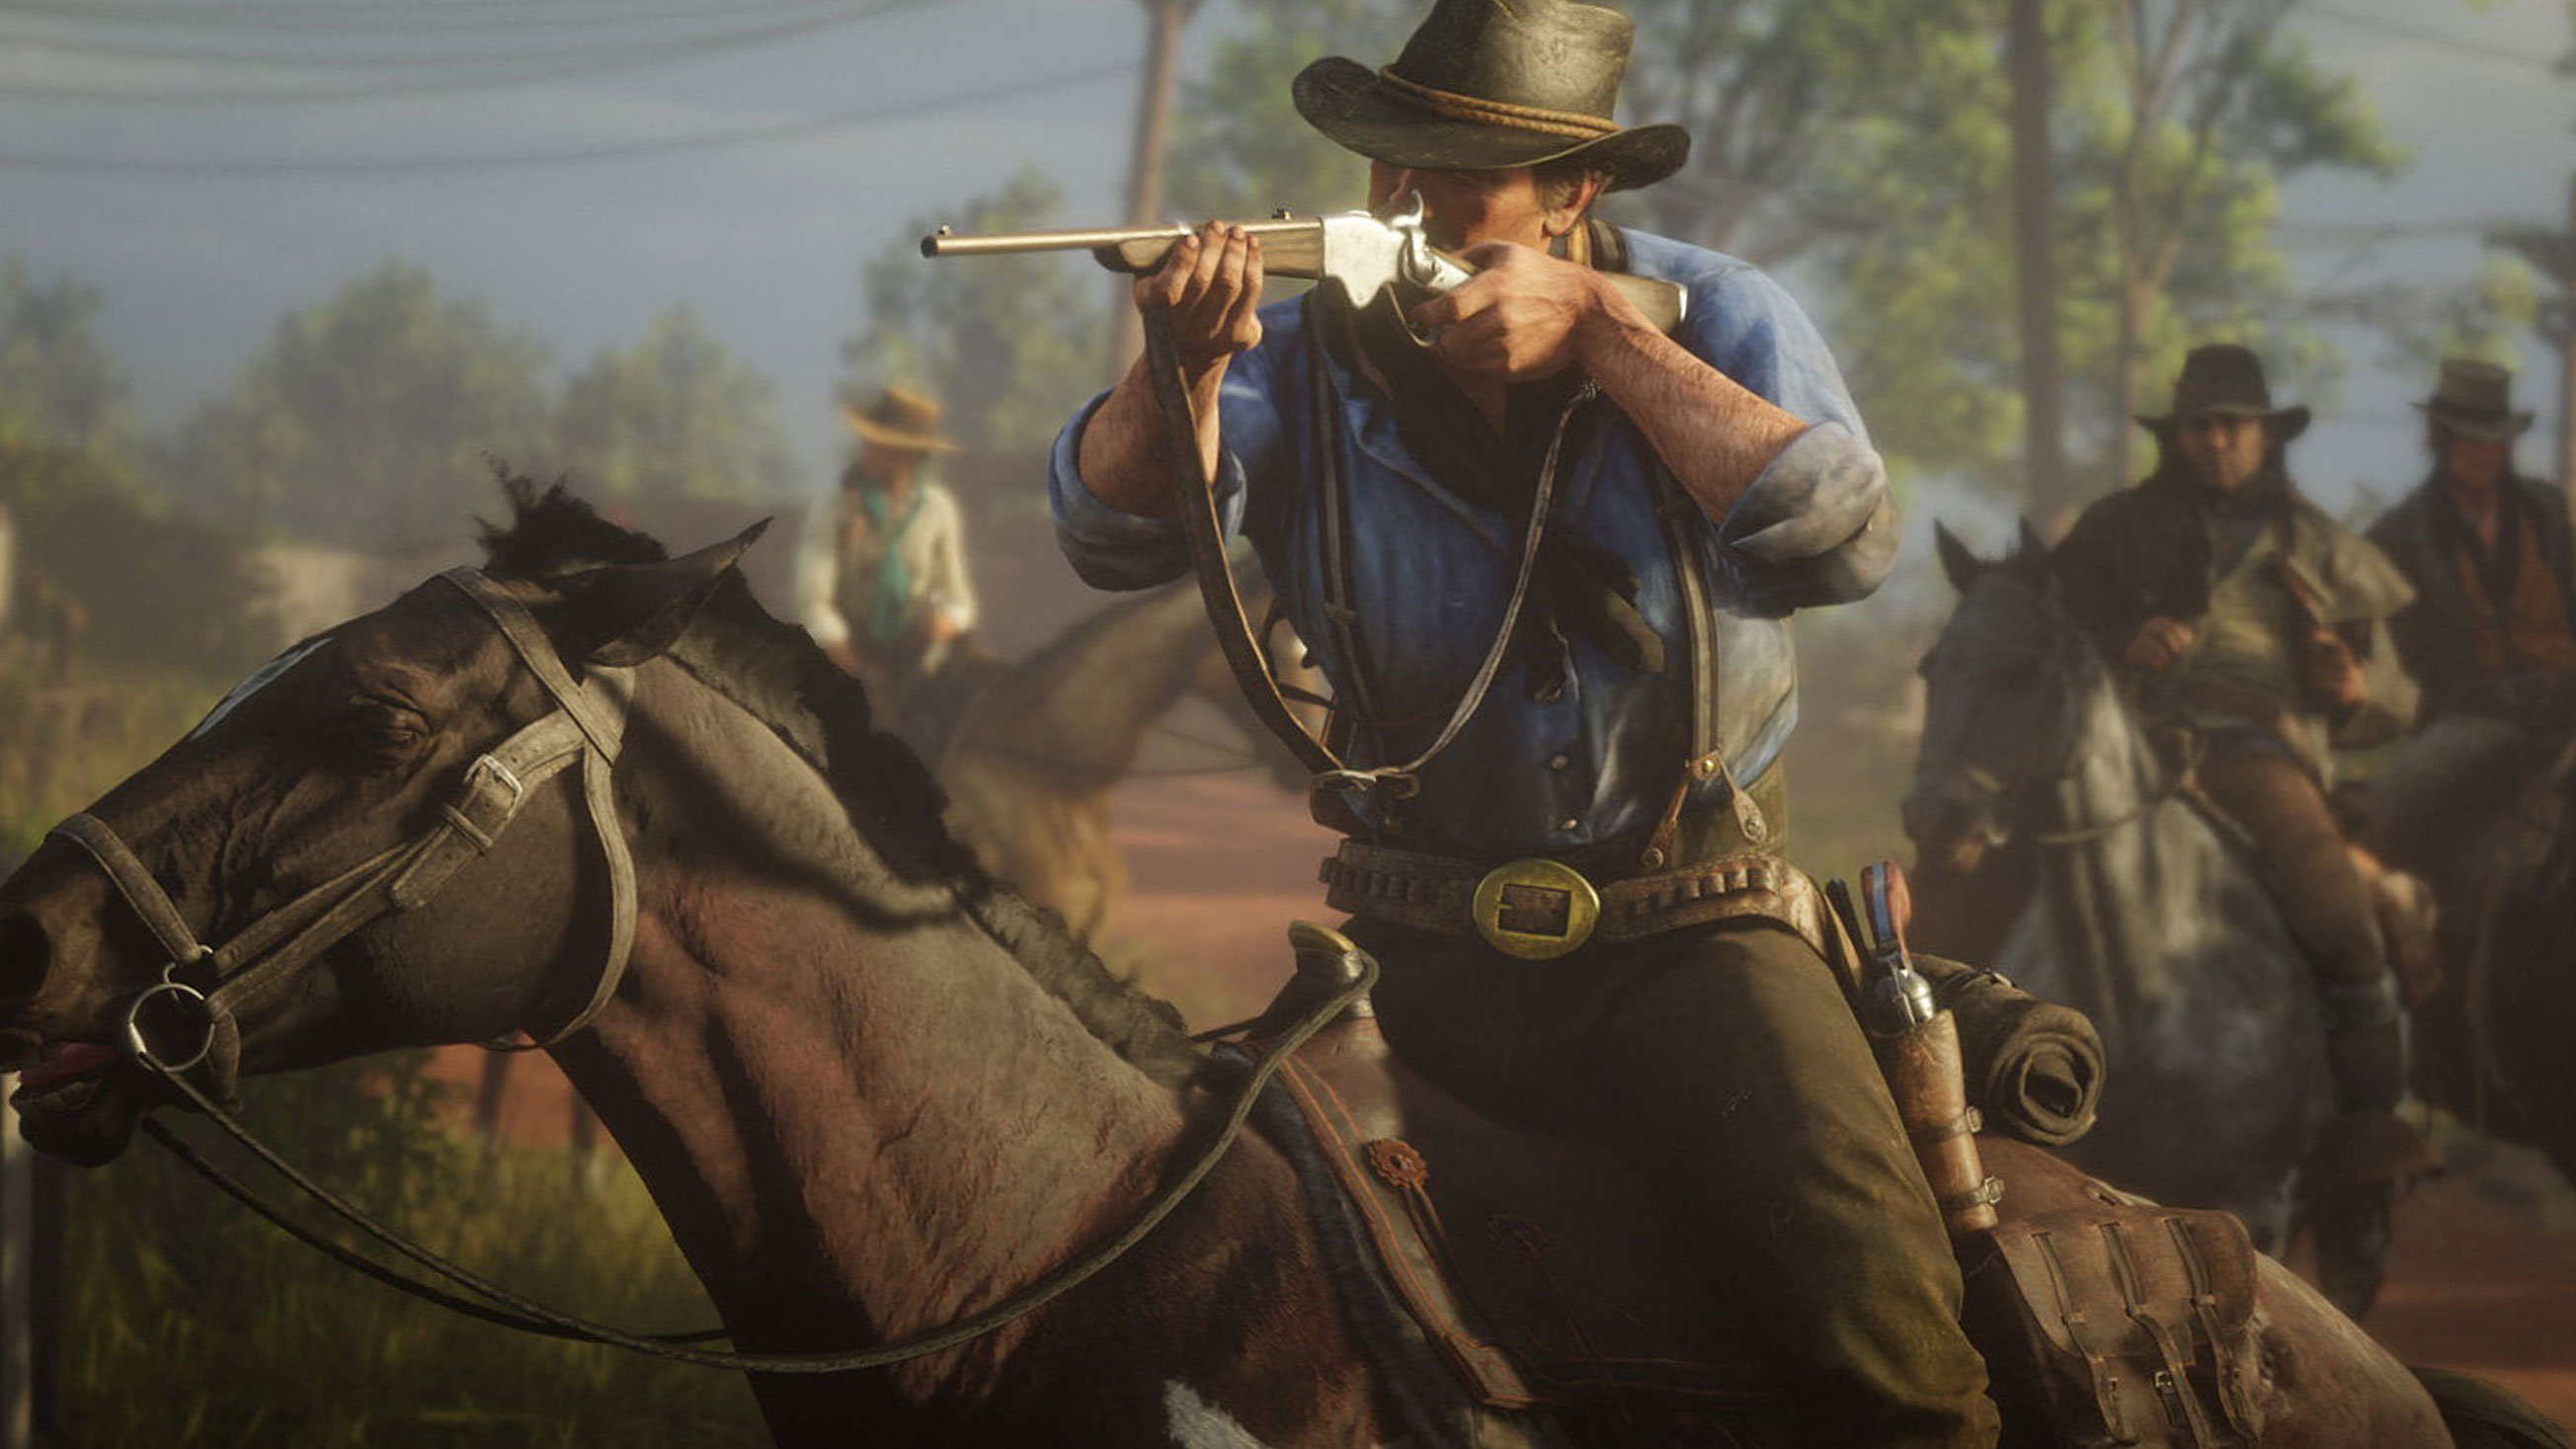 Red dead series. Игра Red Dead Redemption 2. Red Dead Redemption 2 1. Дикий Запад Джон Марстон. Xbox one Red Dead Redemption 2.